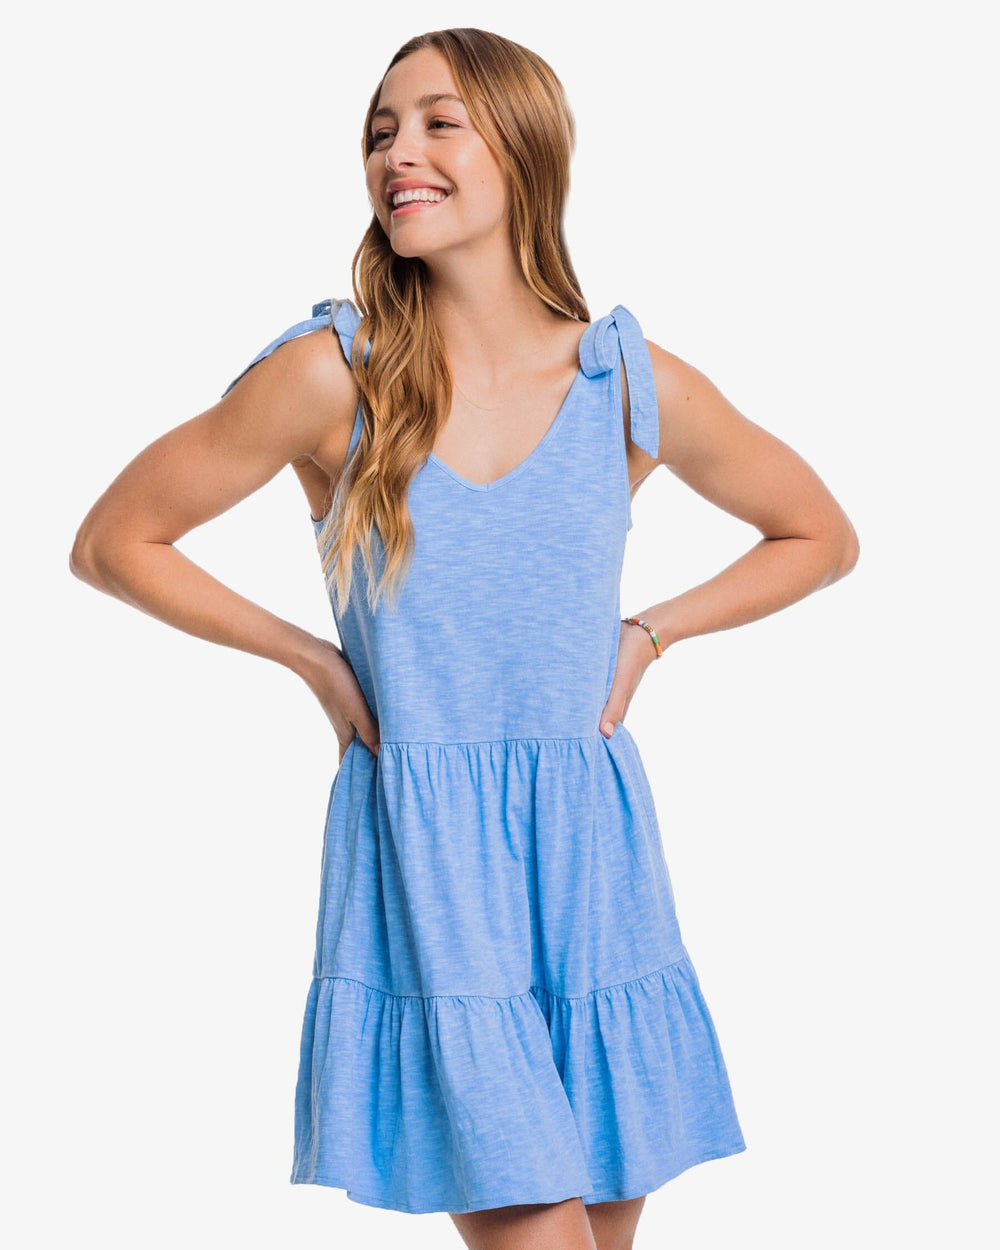 The front view of the Southern Tide Nicole Sun Farer Tiered Tank Dress by Southern Tide - Boat Blue